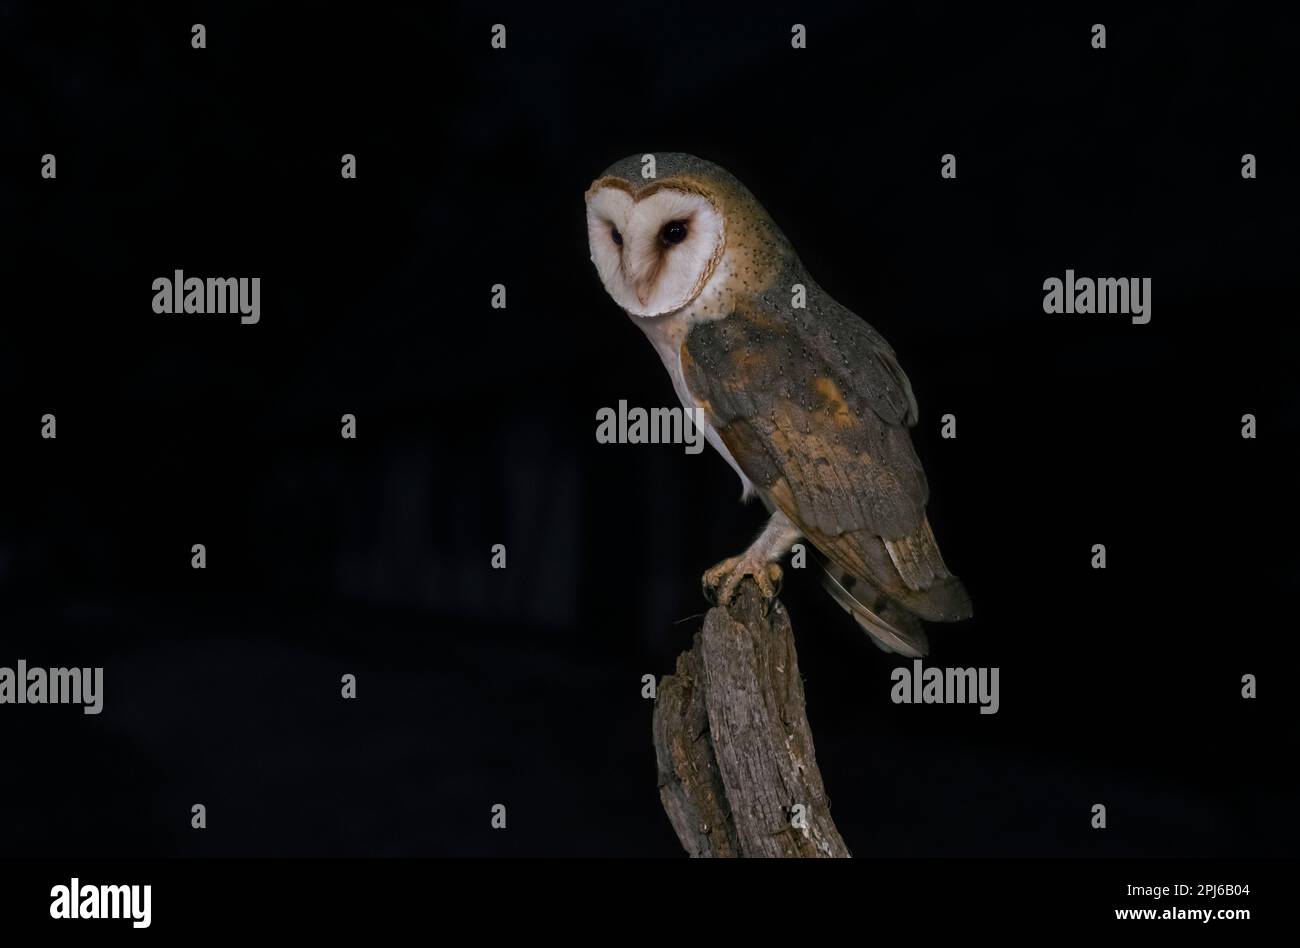 Common barn owl (Tyto alba) perched on old wooden fence post at farm in the countryside at night Stock Photo